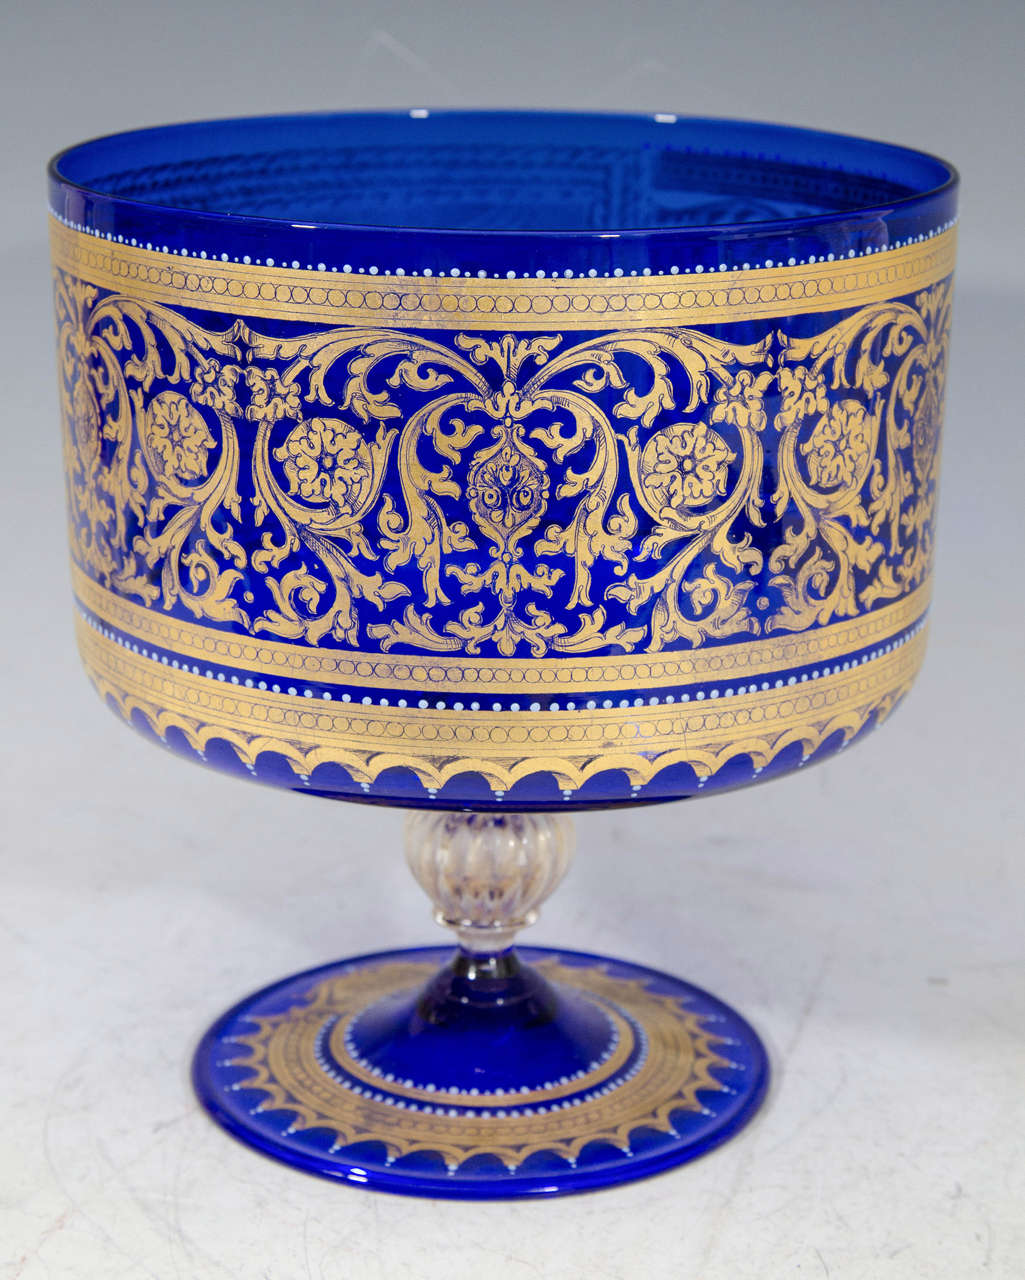 A cobalt Venetian Murano glass footed bowl or compote with hand-painted baroque style scene of Nettuno (Neptune) offering gifts to Venezia (Venice). There is a unique round element on the stem made in clear glass with gold flecks. The base reads